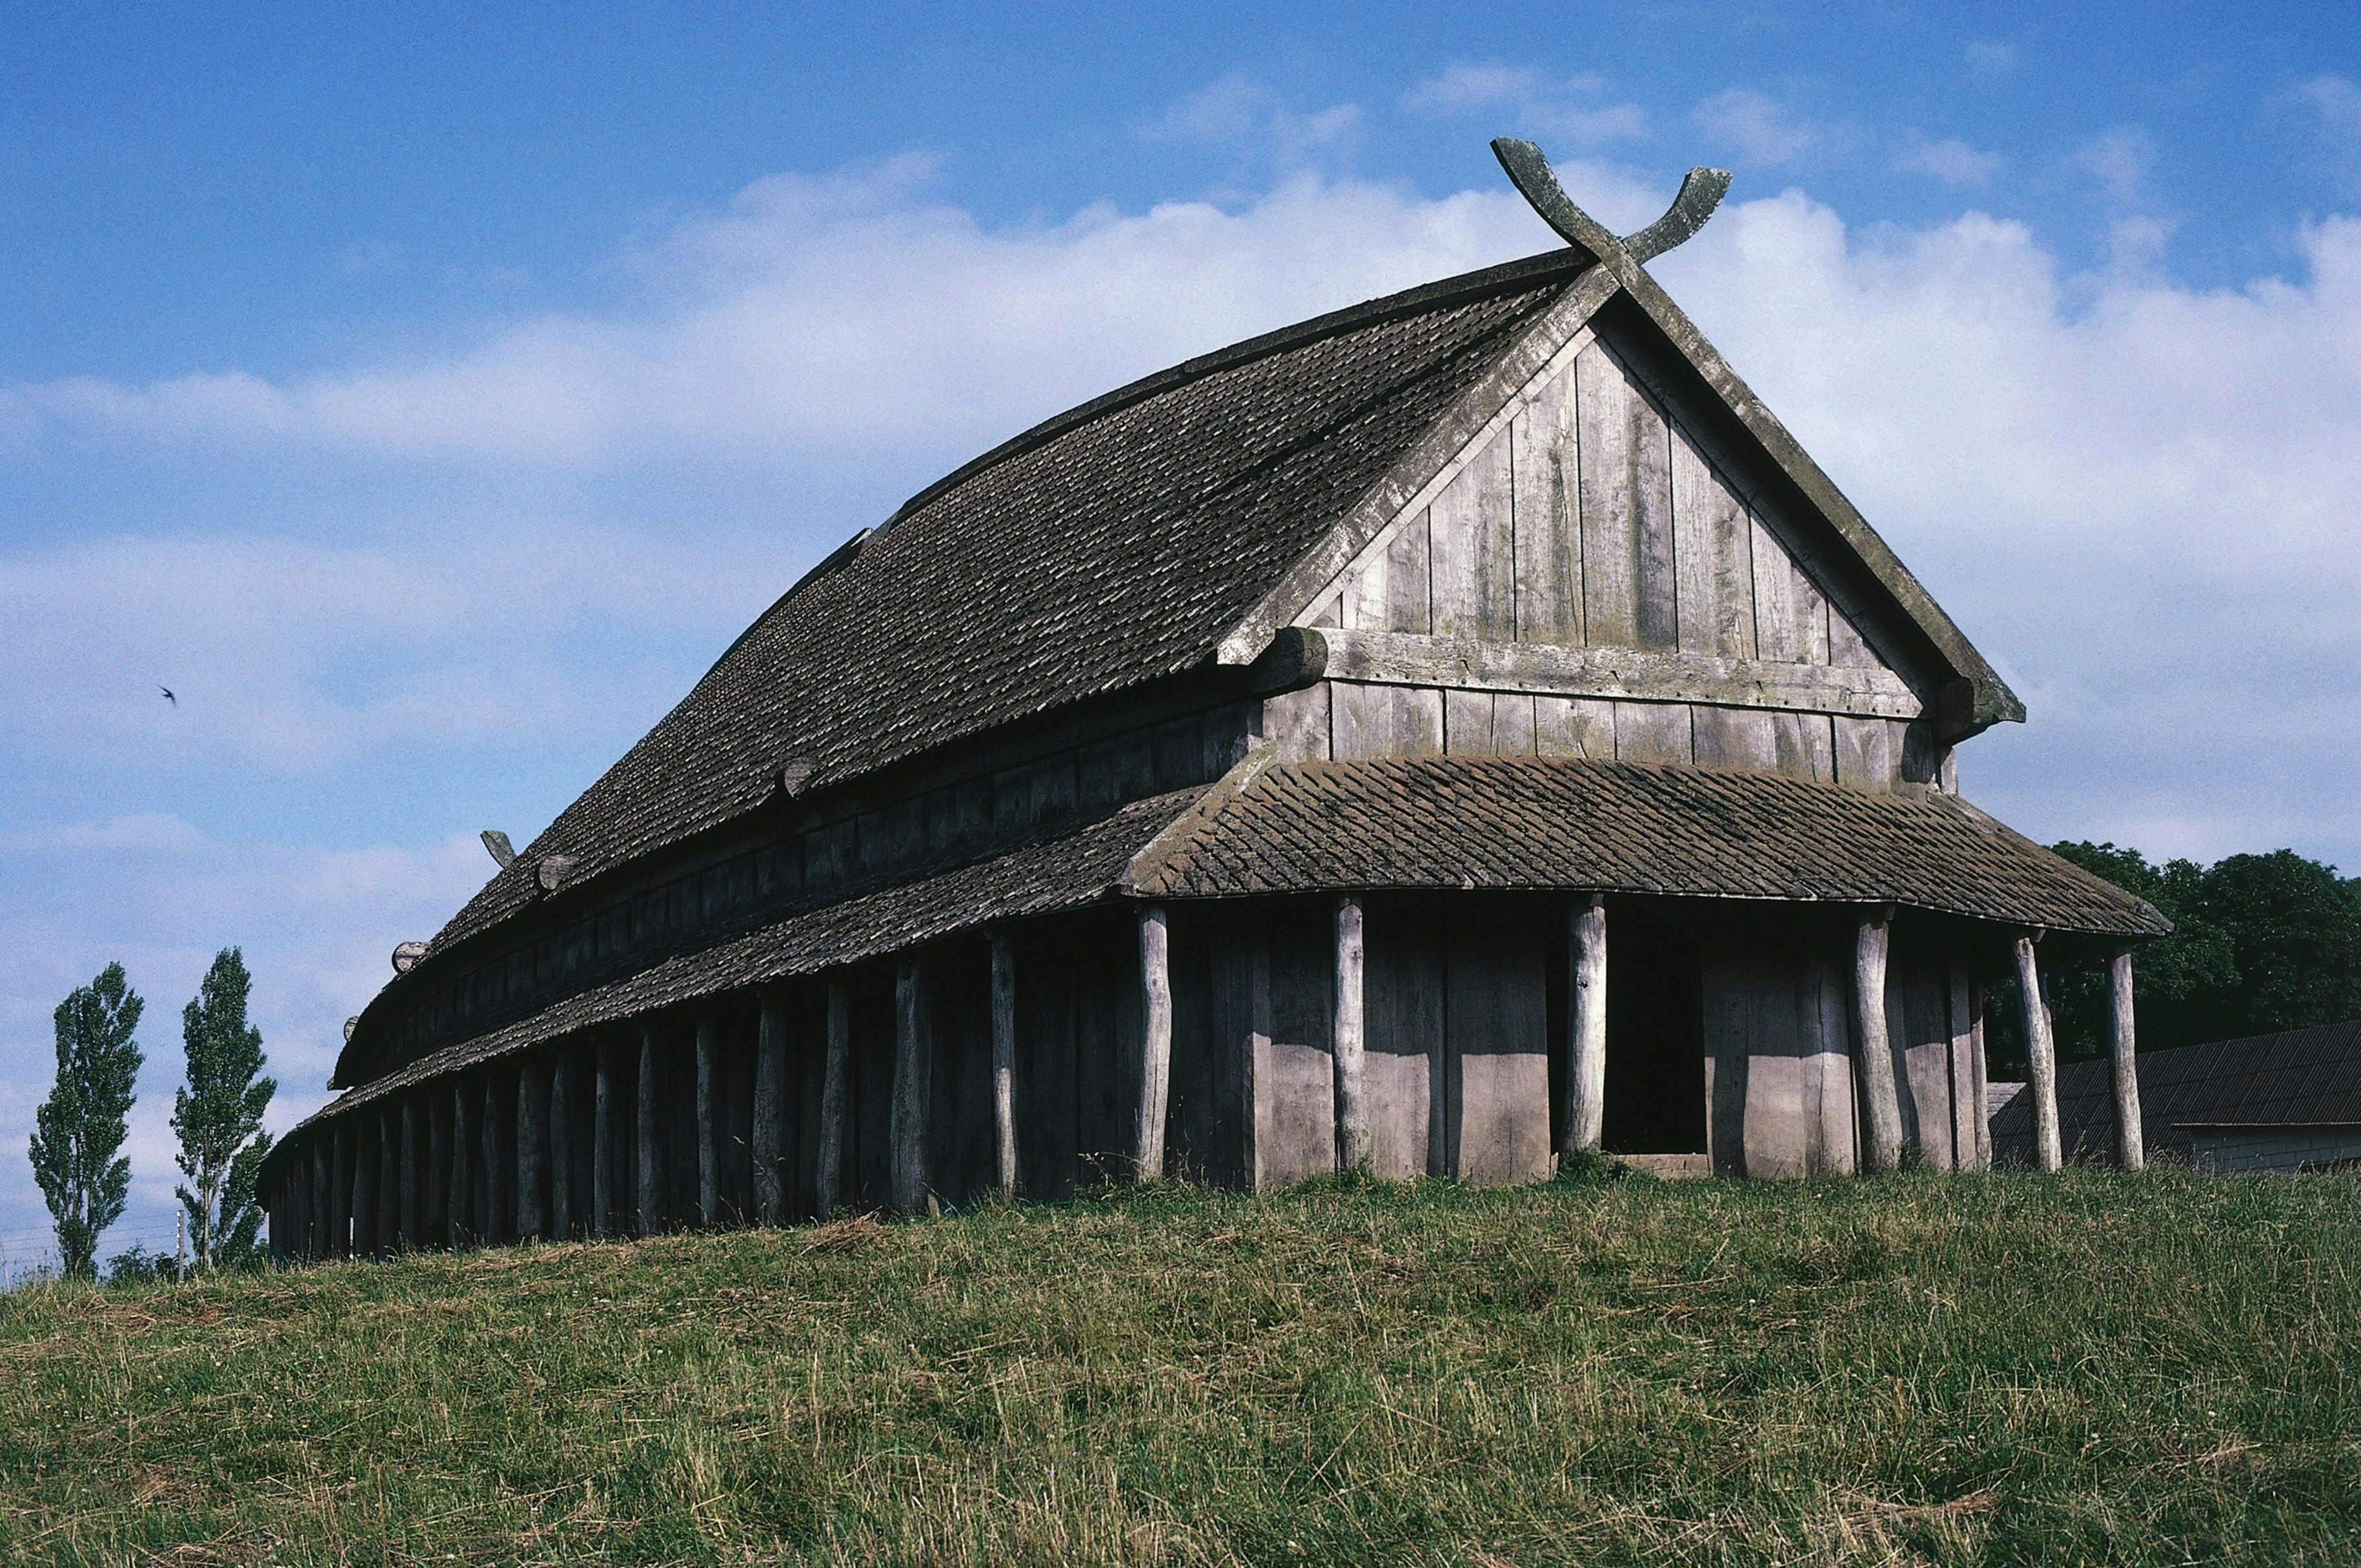 Reconstruction of a wooden Viking house